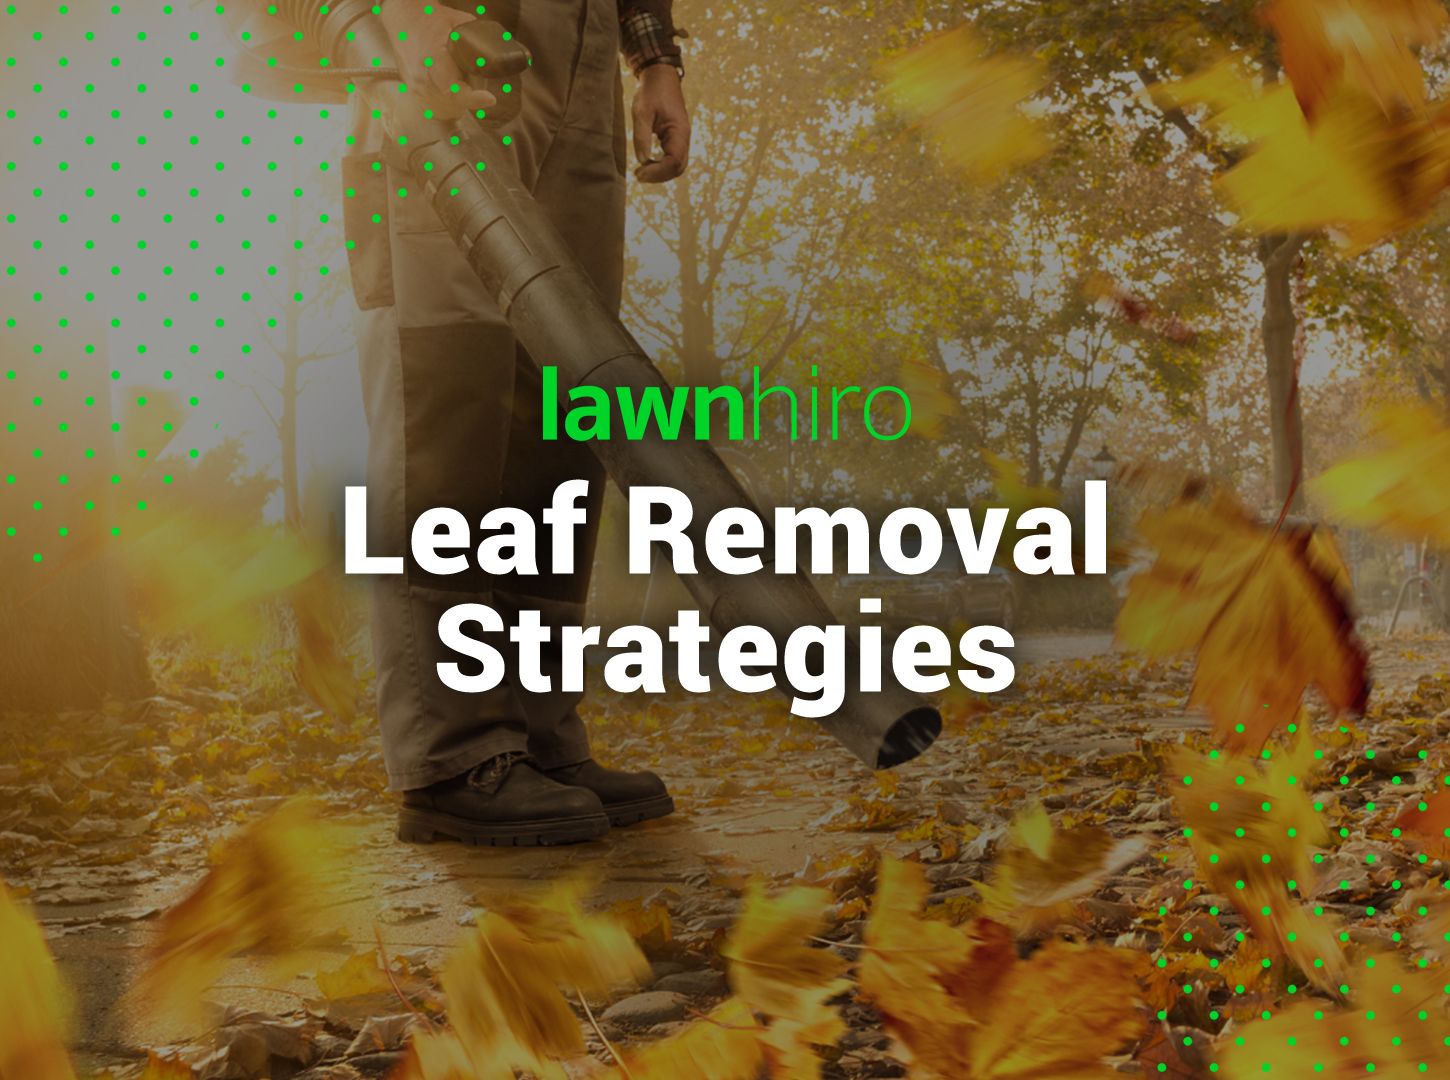 Featured image for “Leaf Removal Strategies”